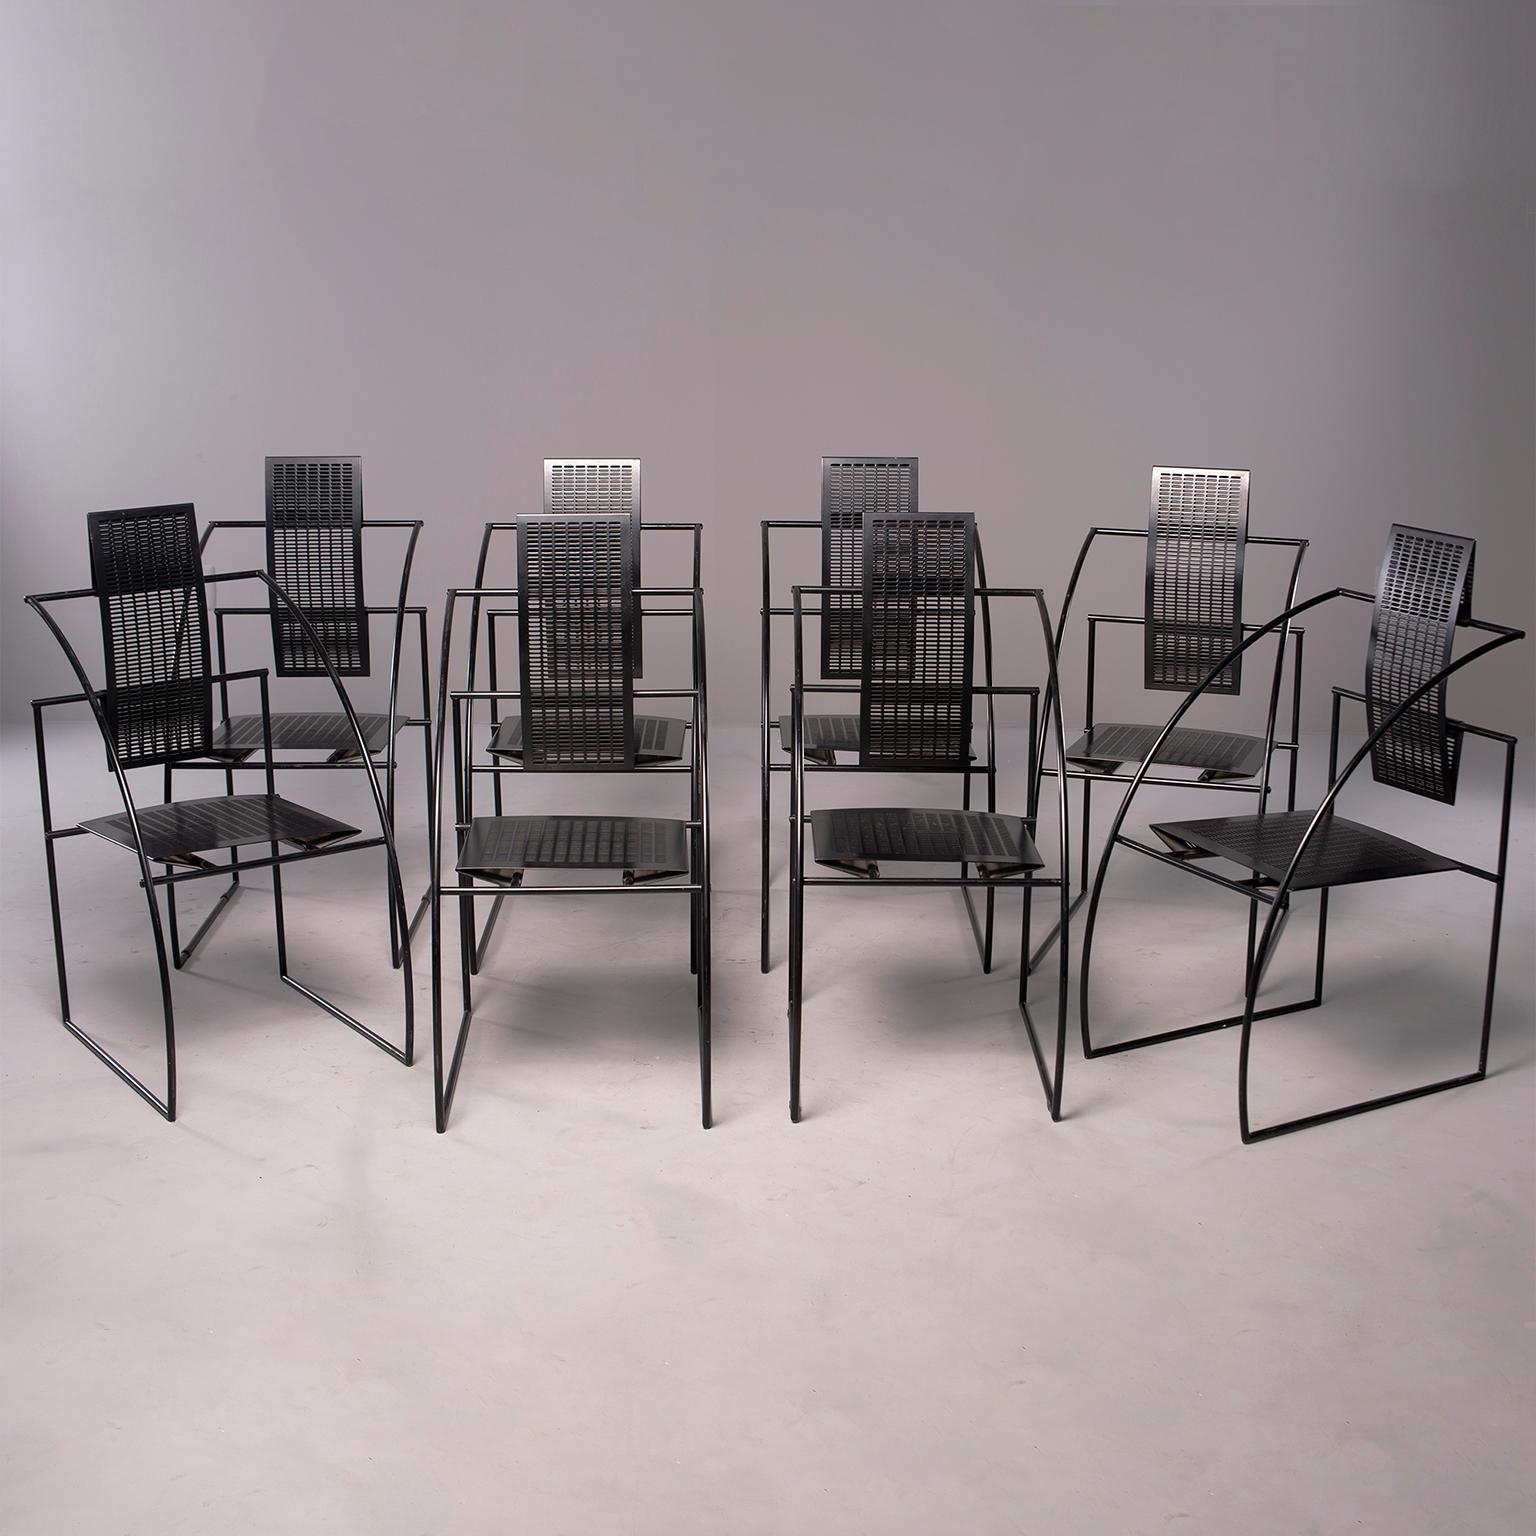 Offered are a set of eight quinta chairs designed by Mario Botta for Alias of Italy. These black metal chairs have a distinctive op art look with curvy arms and mesh metal seats and backs. Can be used indoors or out. Measures: Seats are 16.75